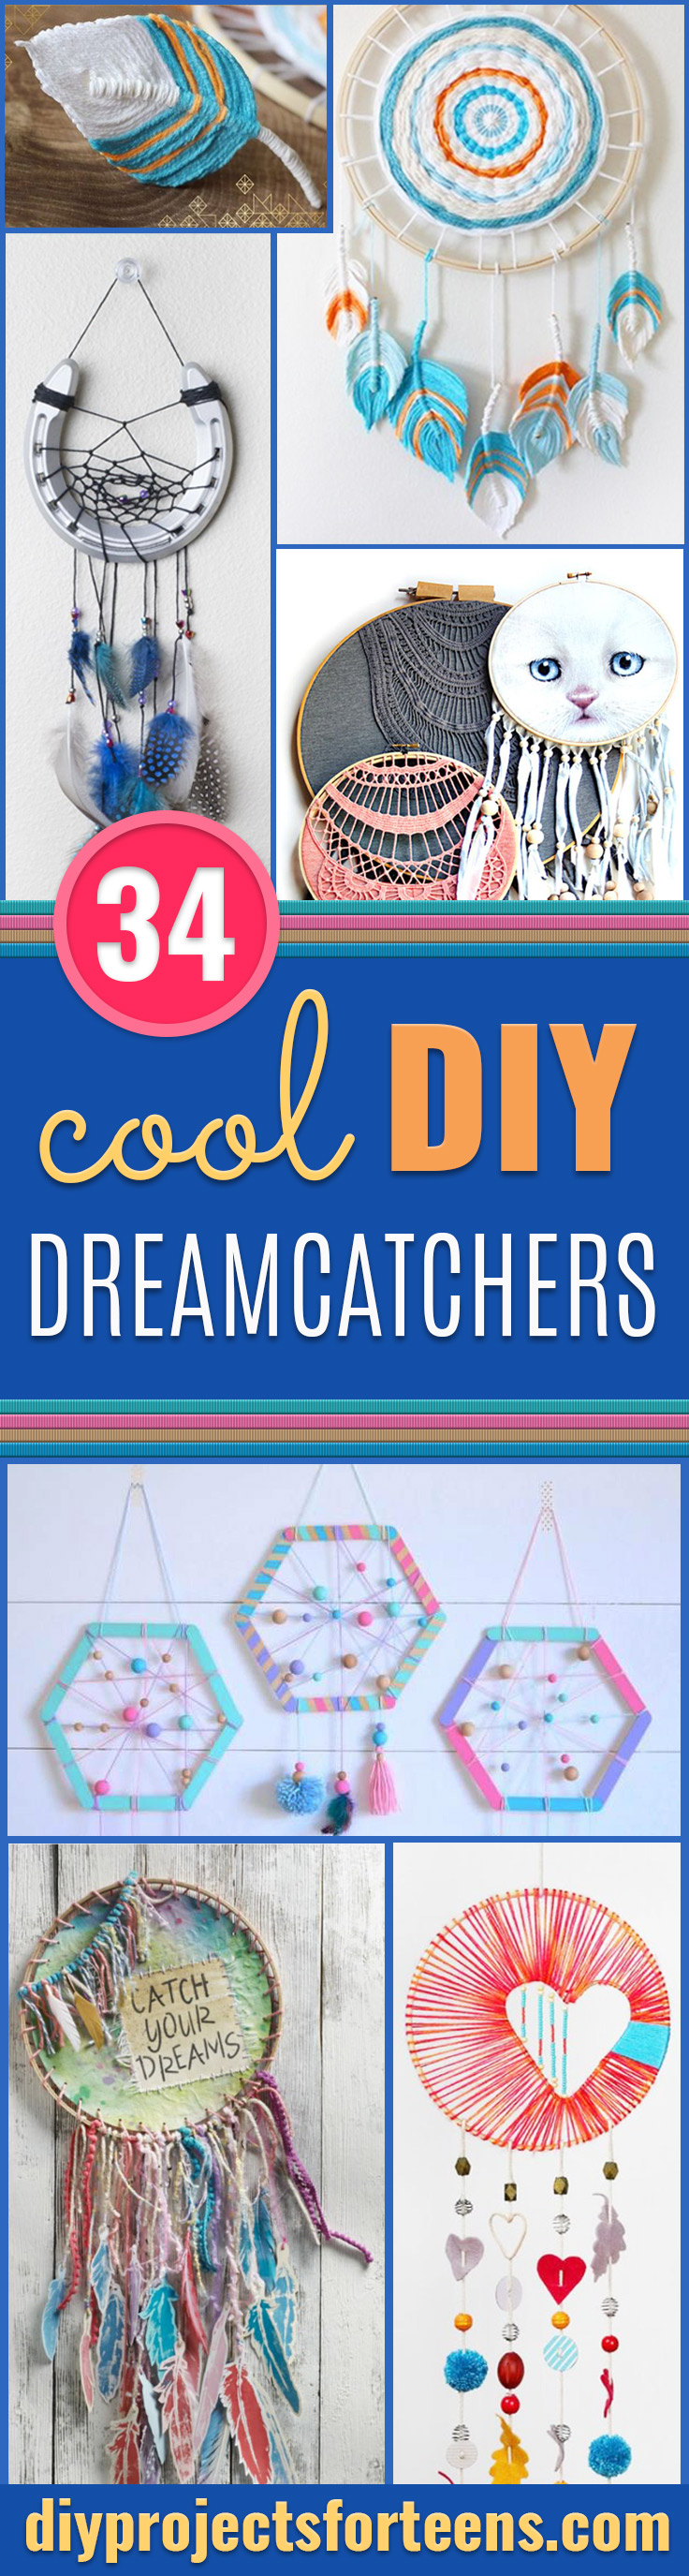 DIY Dream Catchers - How to Make a Dreamcatcher Step by Step Tutorial - Easy Ideas for Dream Catcher for Kids Room - Make a Mobile, Moon Designs, Pattern Ideas, Boho Dreamcatcher With Sticks, Cool Wall Hangings for Teen Rooms - Cheap Home Decor Ideas on A Budget #diyideas #teencrafts #dreamcatchers